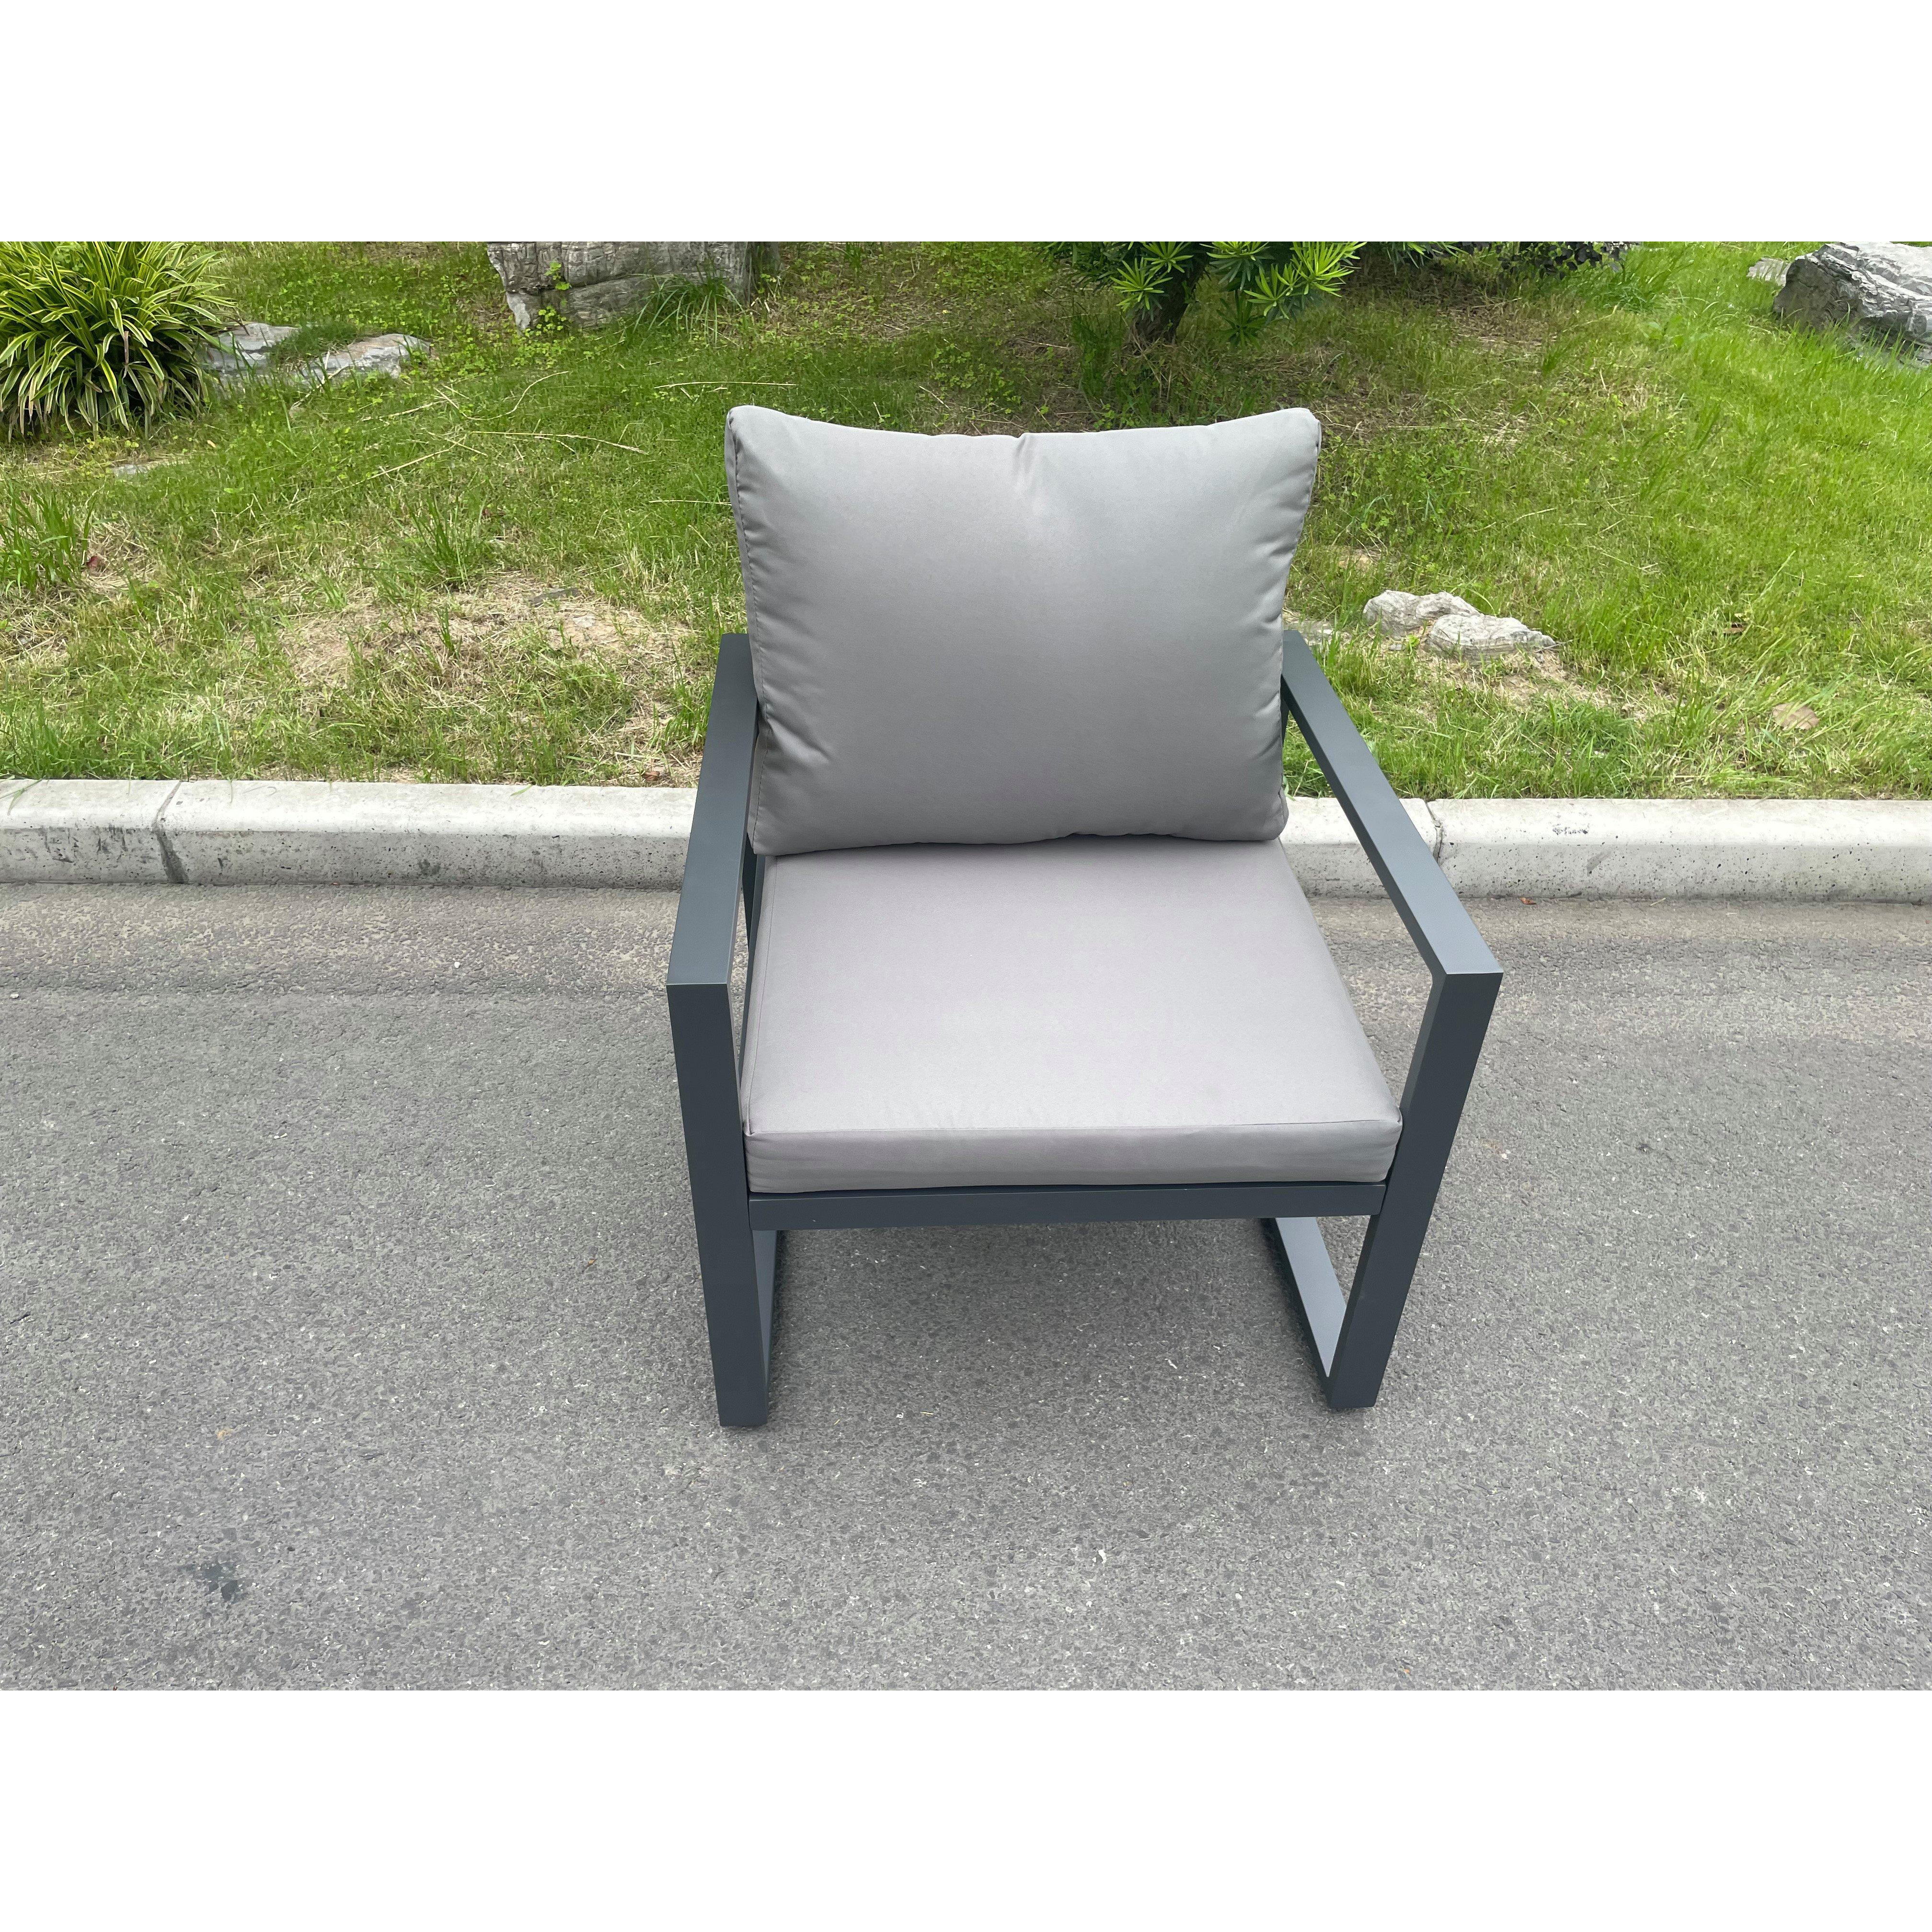 Aluminum Outdoor Garden Furniture Single Arm Chair Sofa With Seat And Back Cushion Dark Grey - image 1